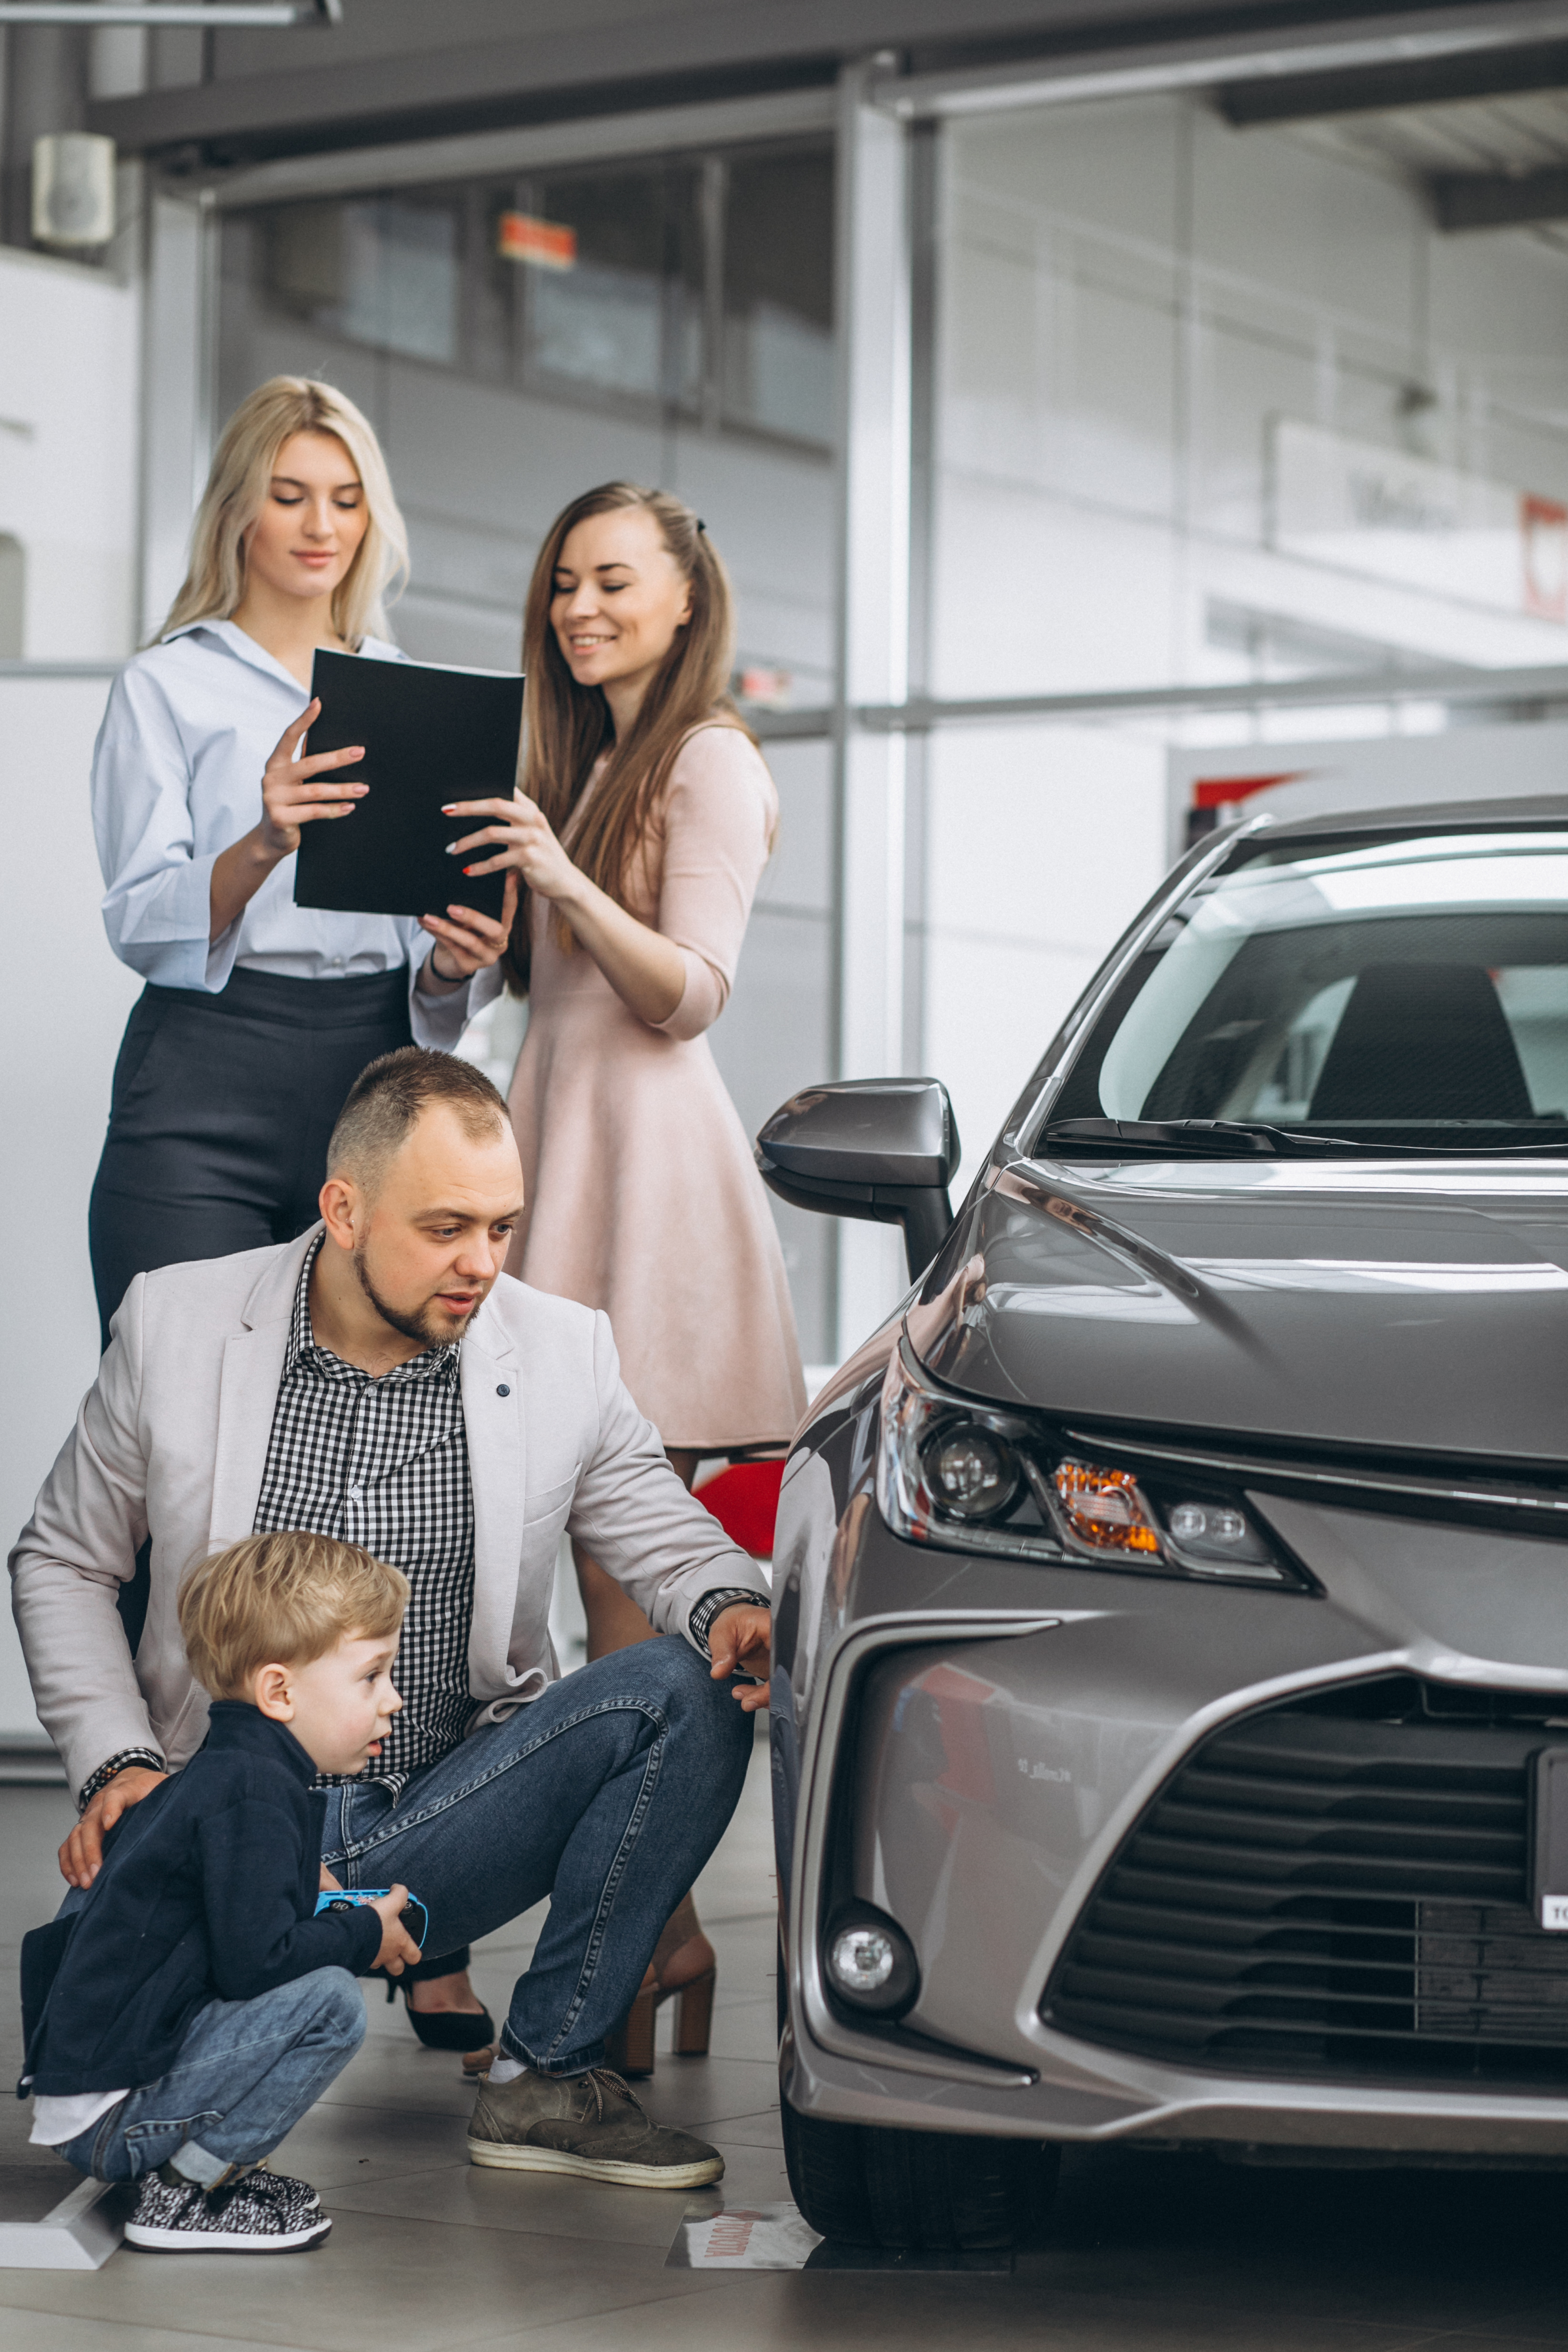 The Art of Buying a Used Car: A Step-by-Step Guide